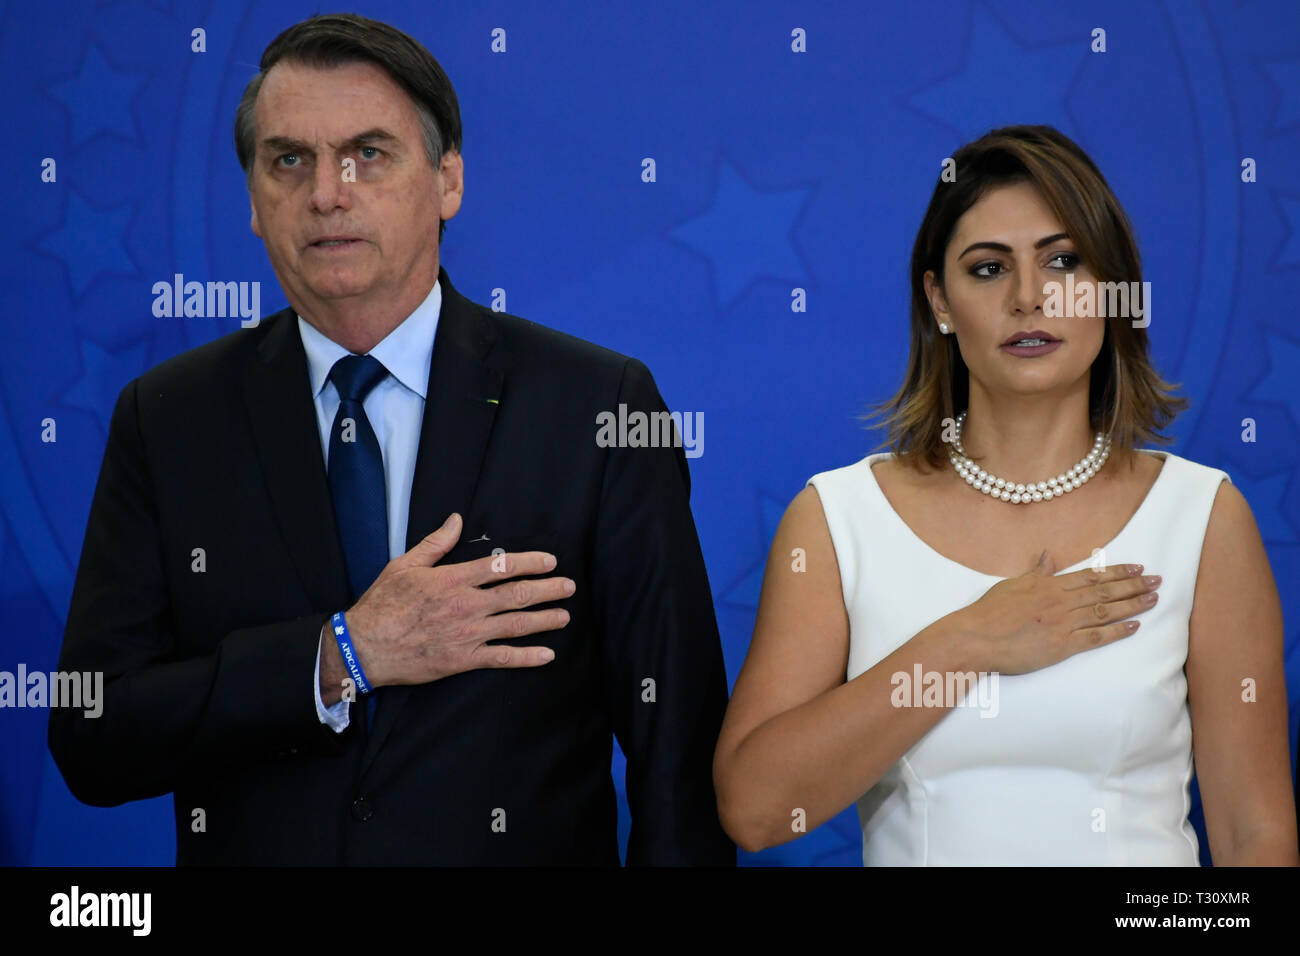 - Jair Bolsonaro, president of the republic, accompanied by Michelle Bolsonaro, first lady, this Friday, April 5, during a ceremony of greetings to the General Officials recently promoted and Ceremony of delivery of the Medal of Vitoria and the Military Medal held in the Palacio do Planalto. Photo: Mateus Bonomi / AGIF Stock Photo